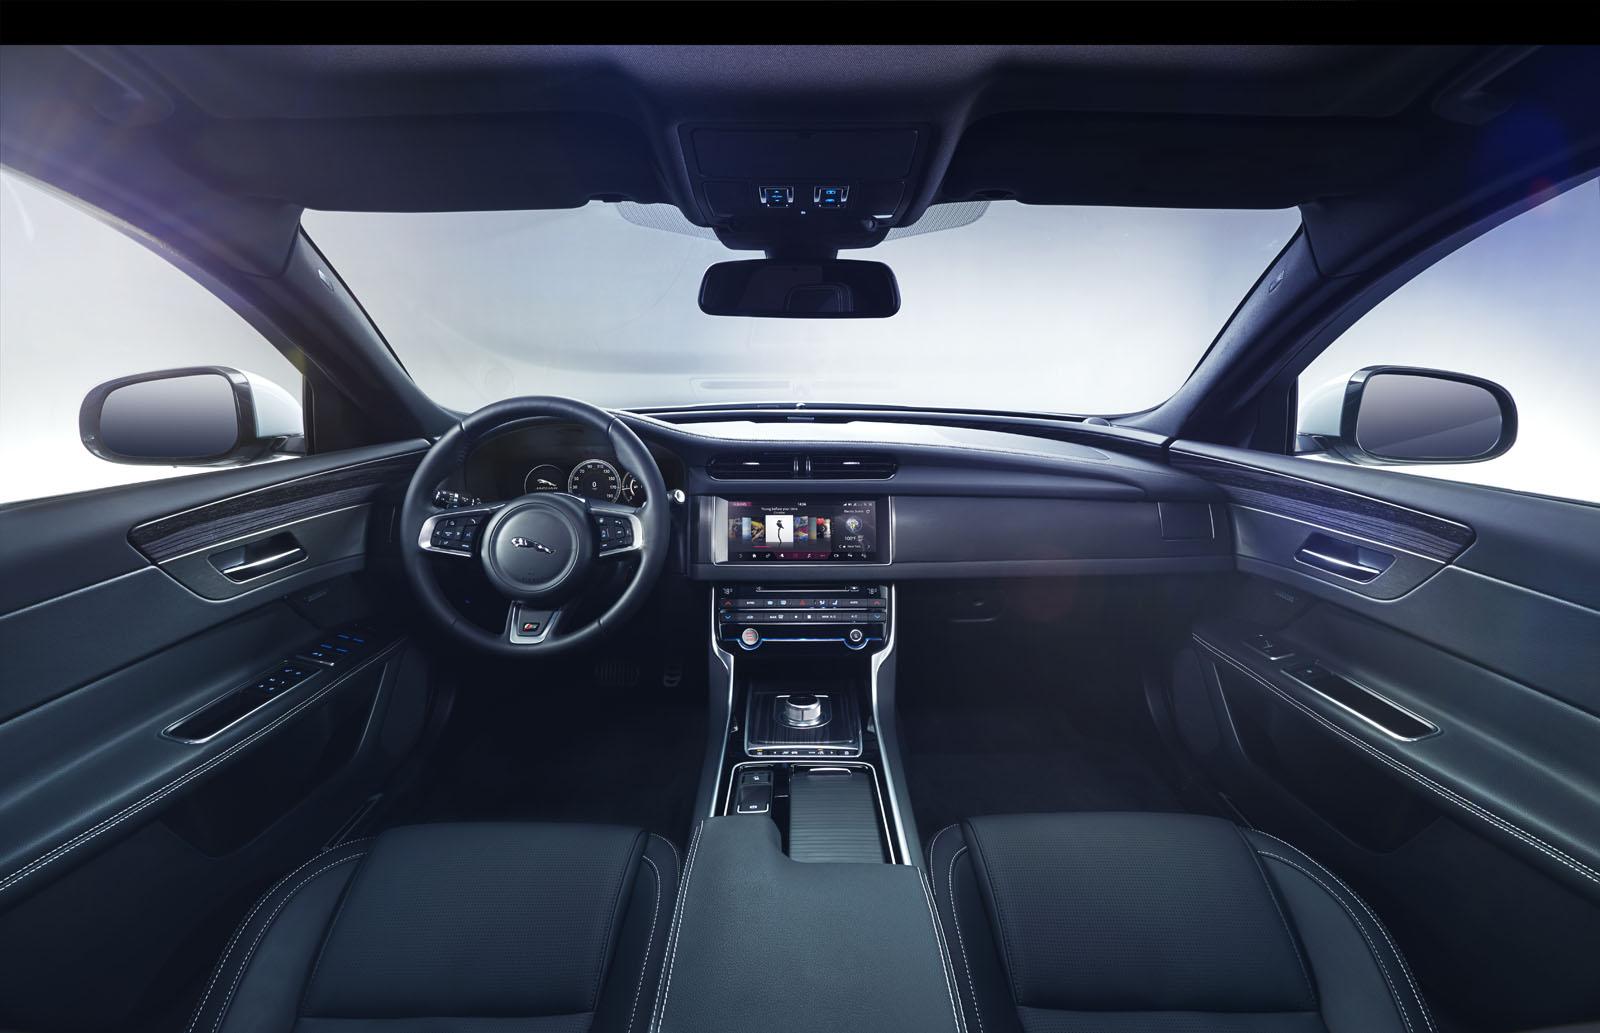 All New 2016 Jaguar Xf Interior Image Published Full Detail On